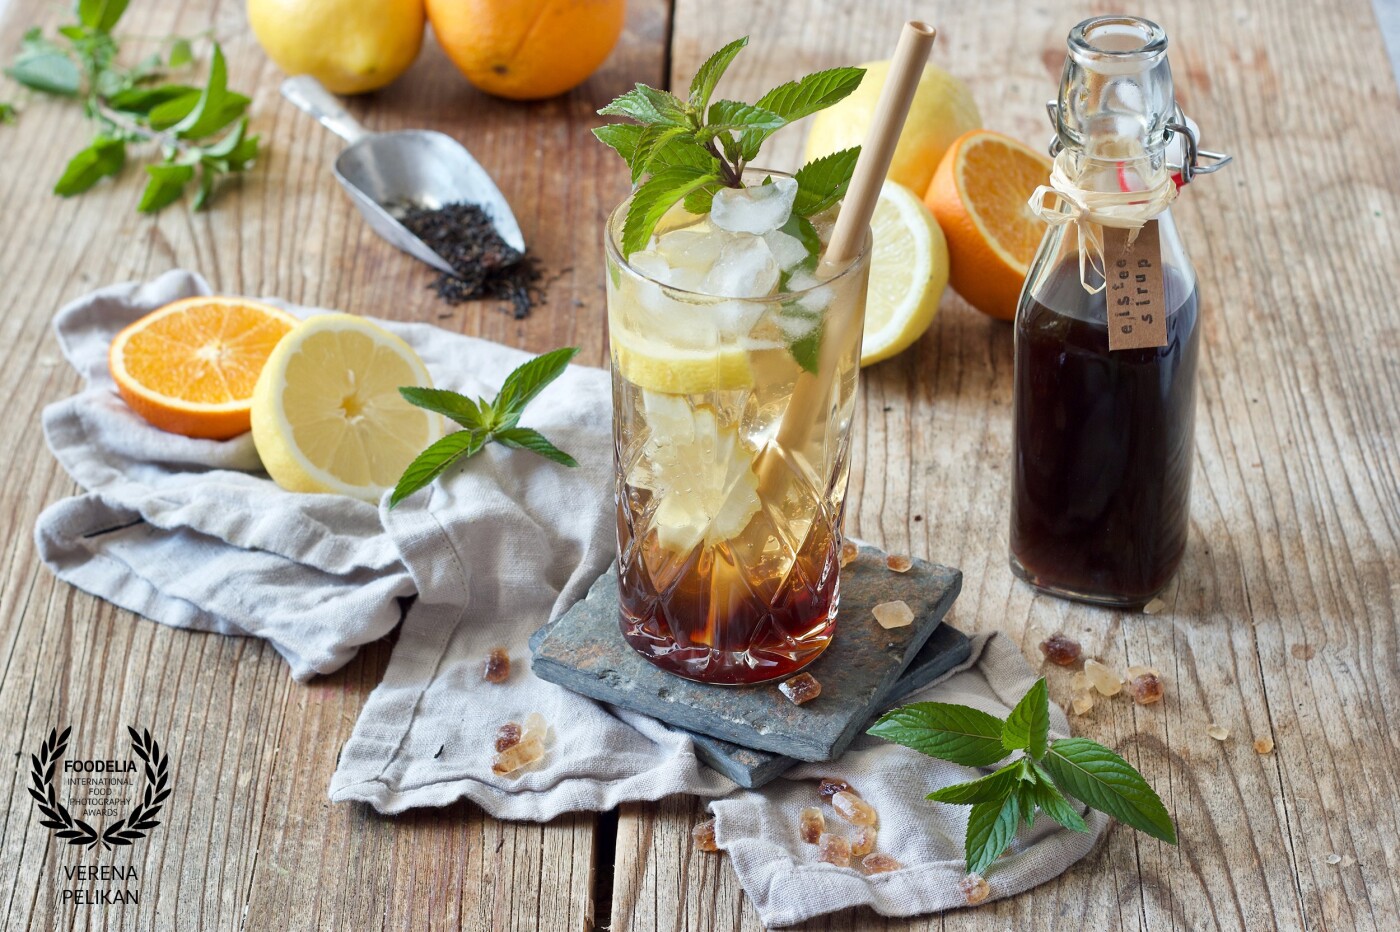 You love the taste of fresh ice tea, but don't have the extra fridge space? Keep a bottle of this delicious homemade Ice Tea Syrup Concentrate on hand to mix up a pitcher Ice Tea in no time at all<br />
Recipe can be found on my website: https://www.sweetsandlifestyle.com/rezept/eisteesirup-eisteekonzentrat/